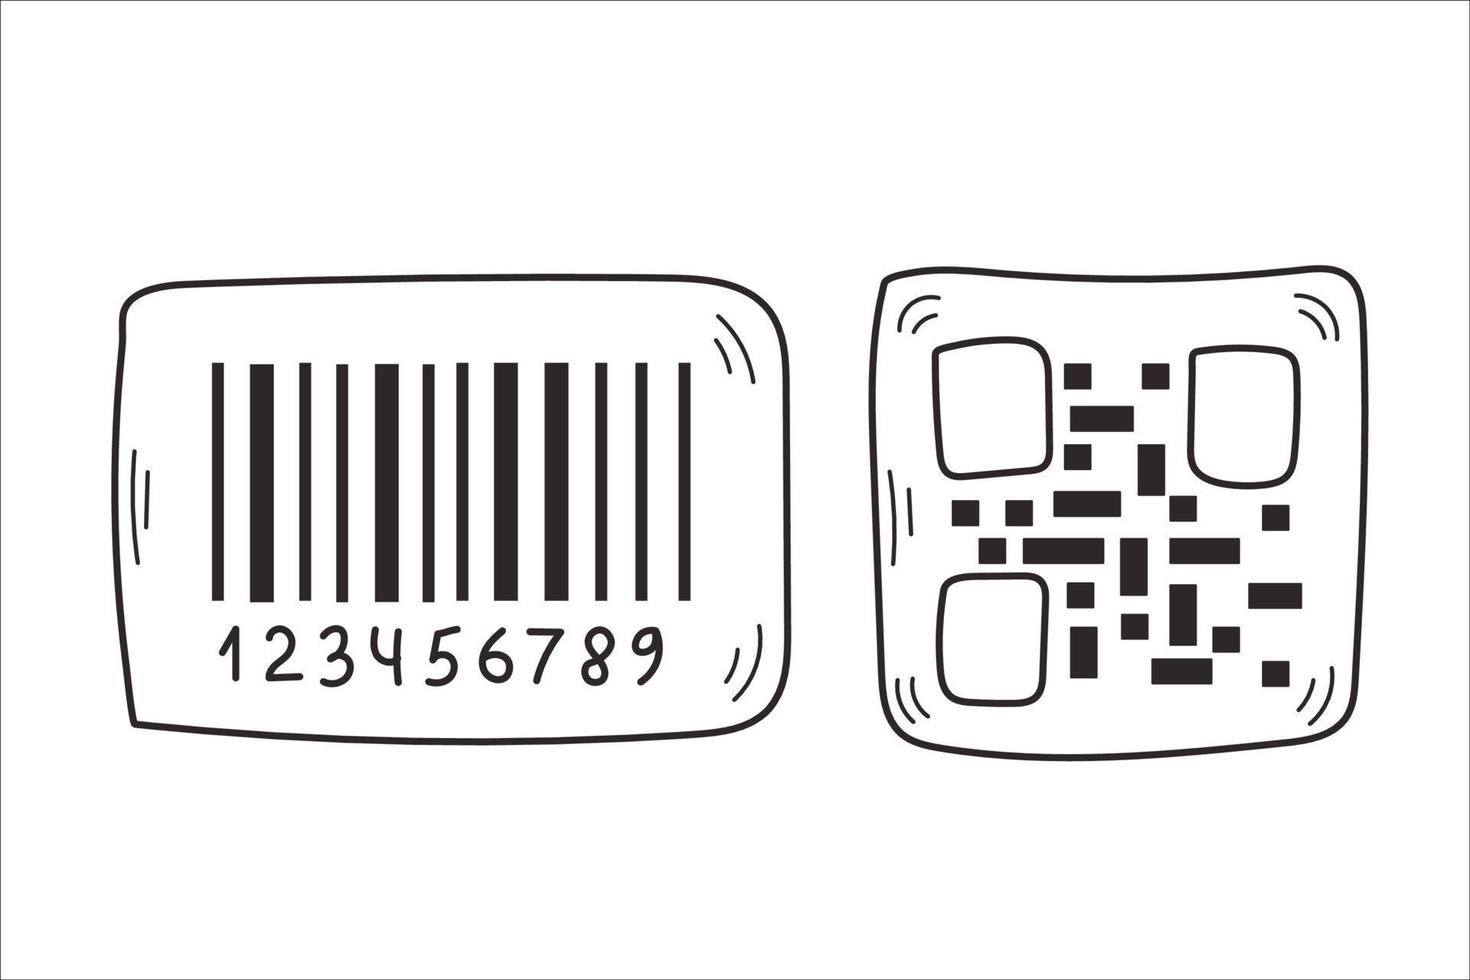 Barcode and QR code doodles vector